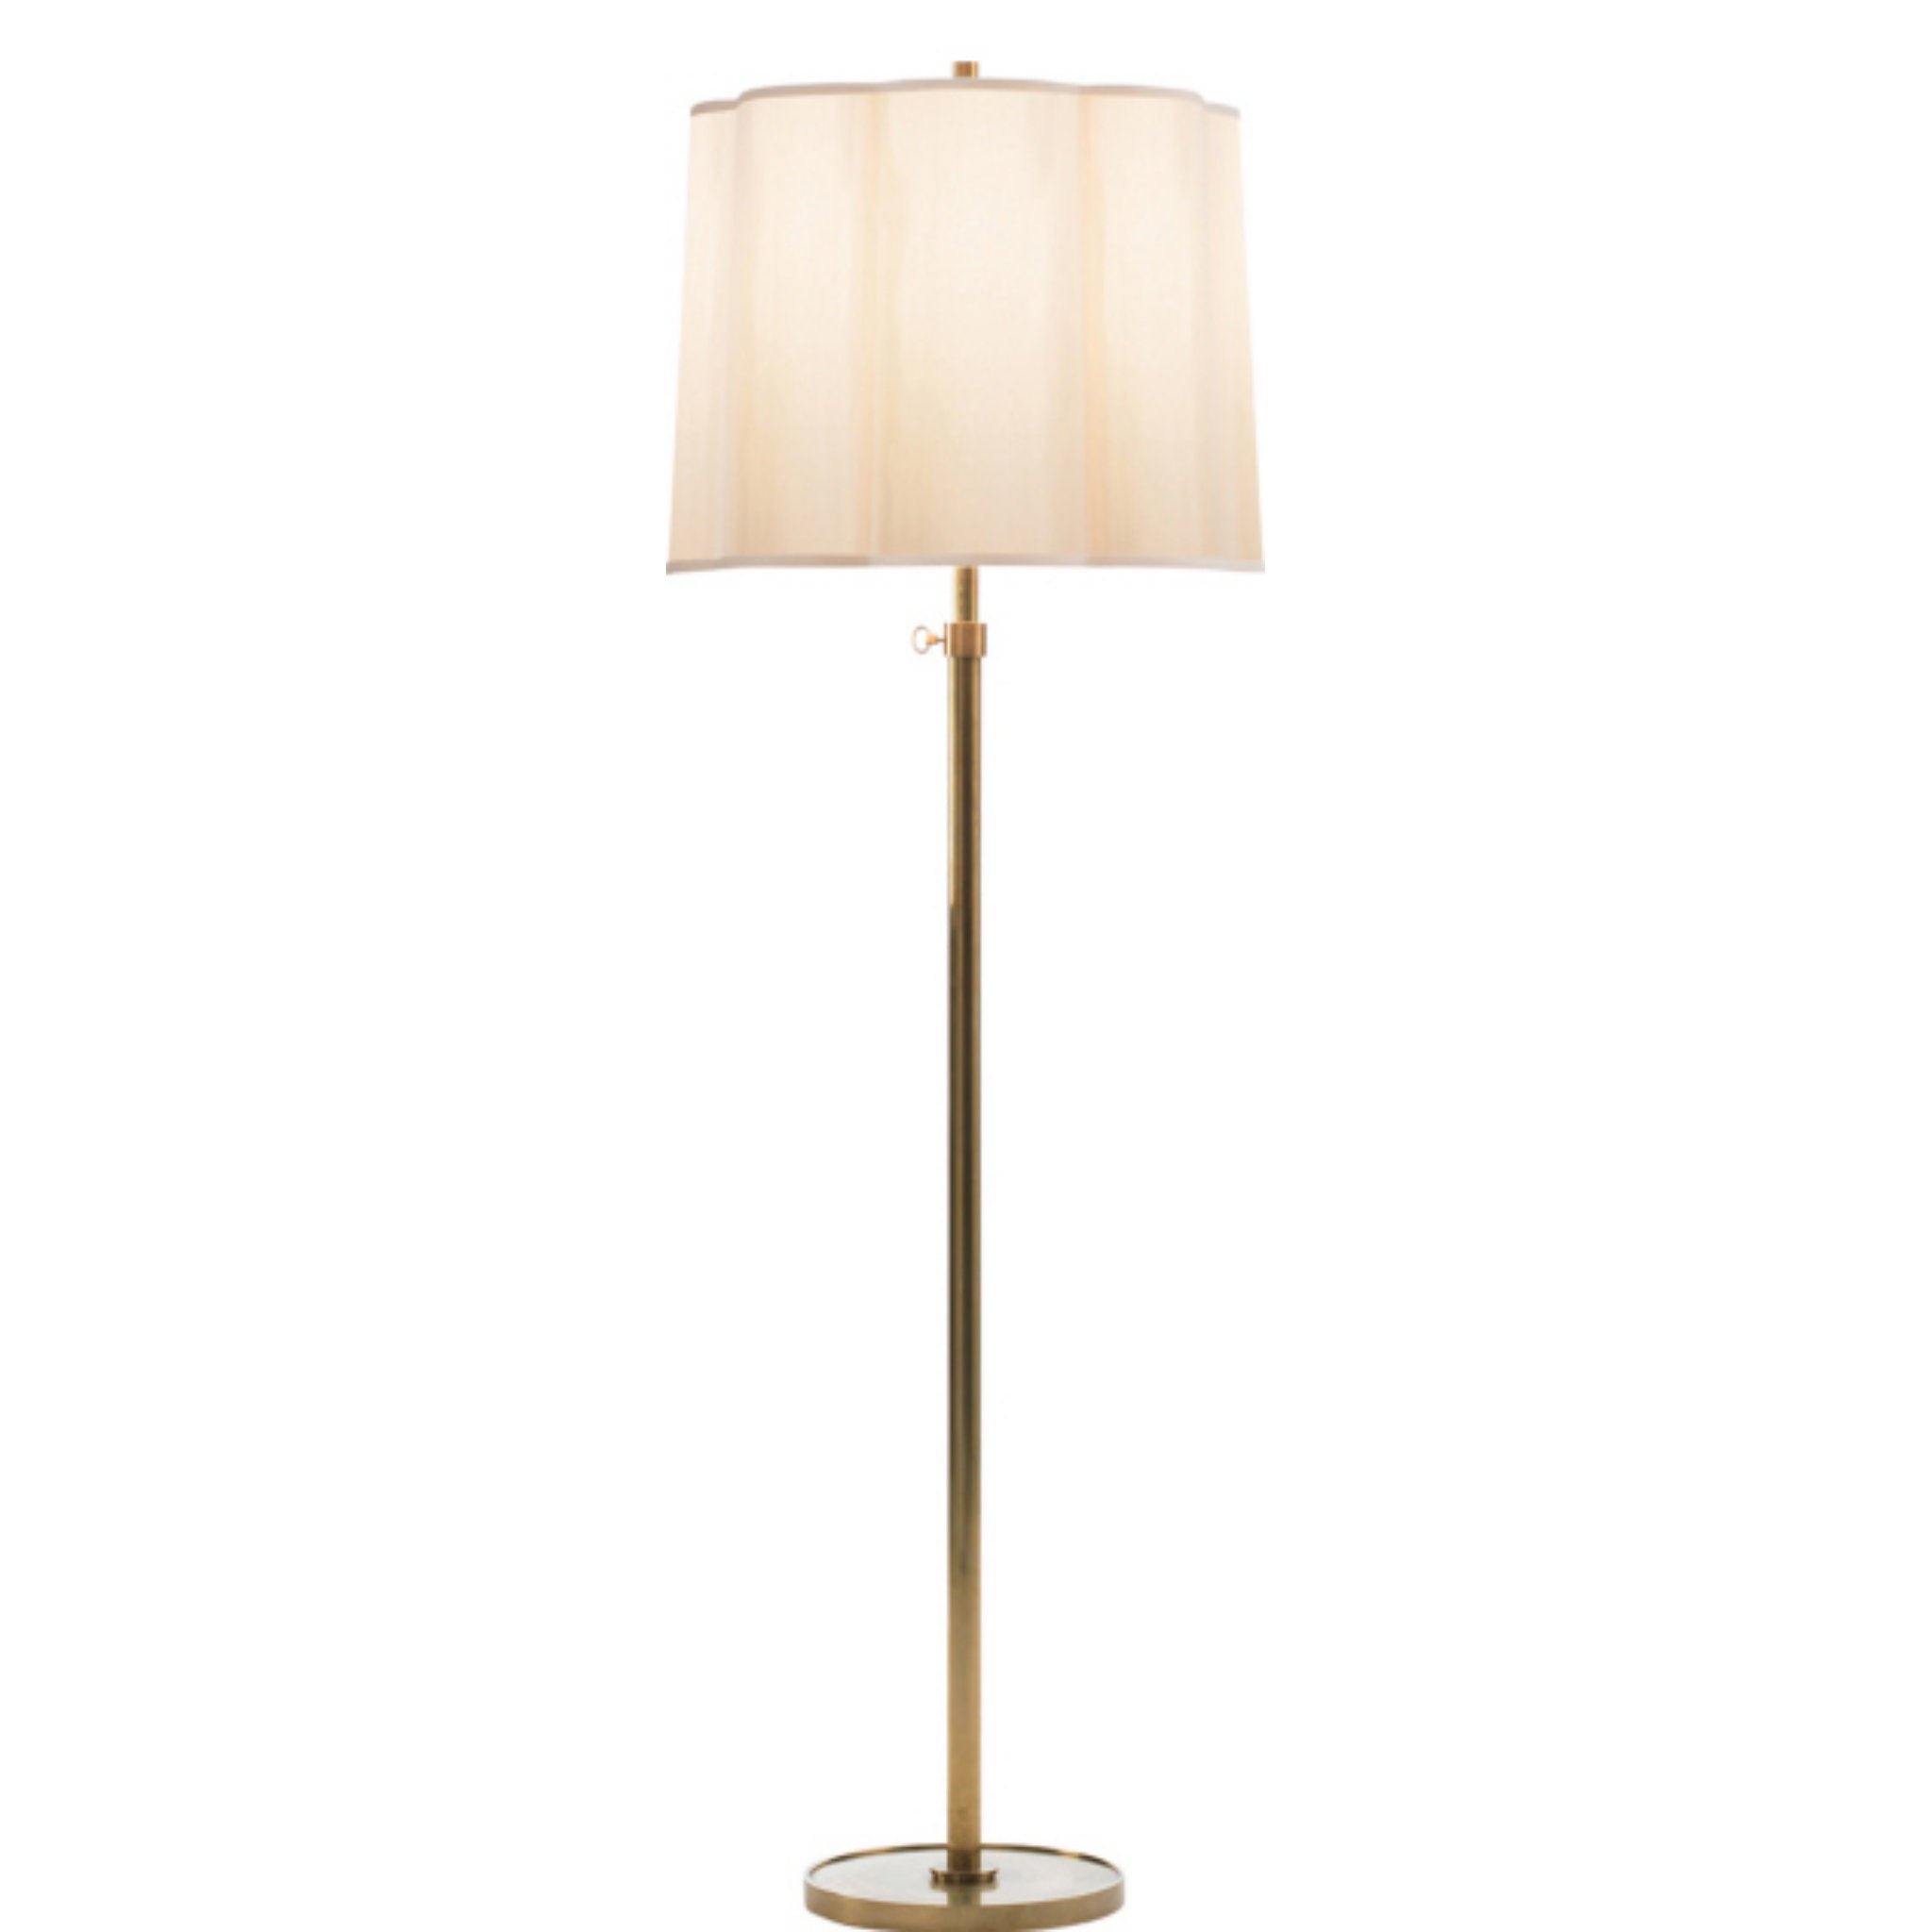 Barbara Barry Simple Floor Lamp in Soft Brass with Silk Scalloped Shade